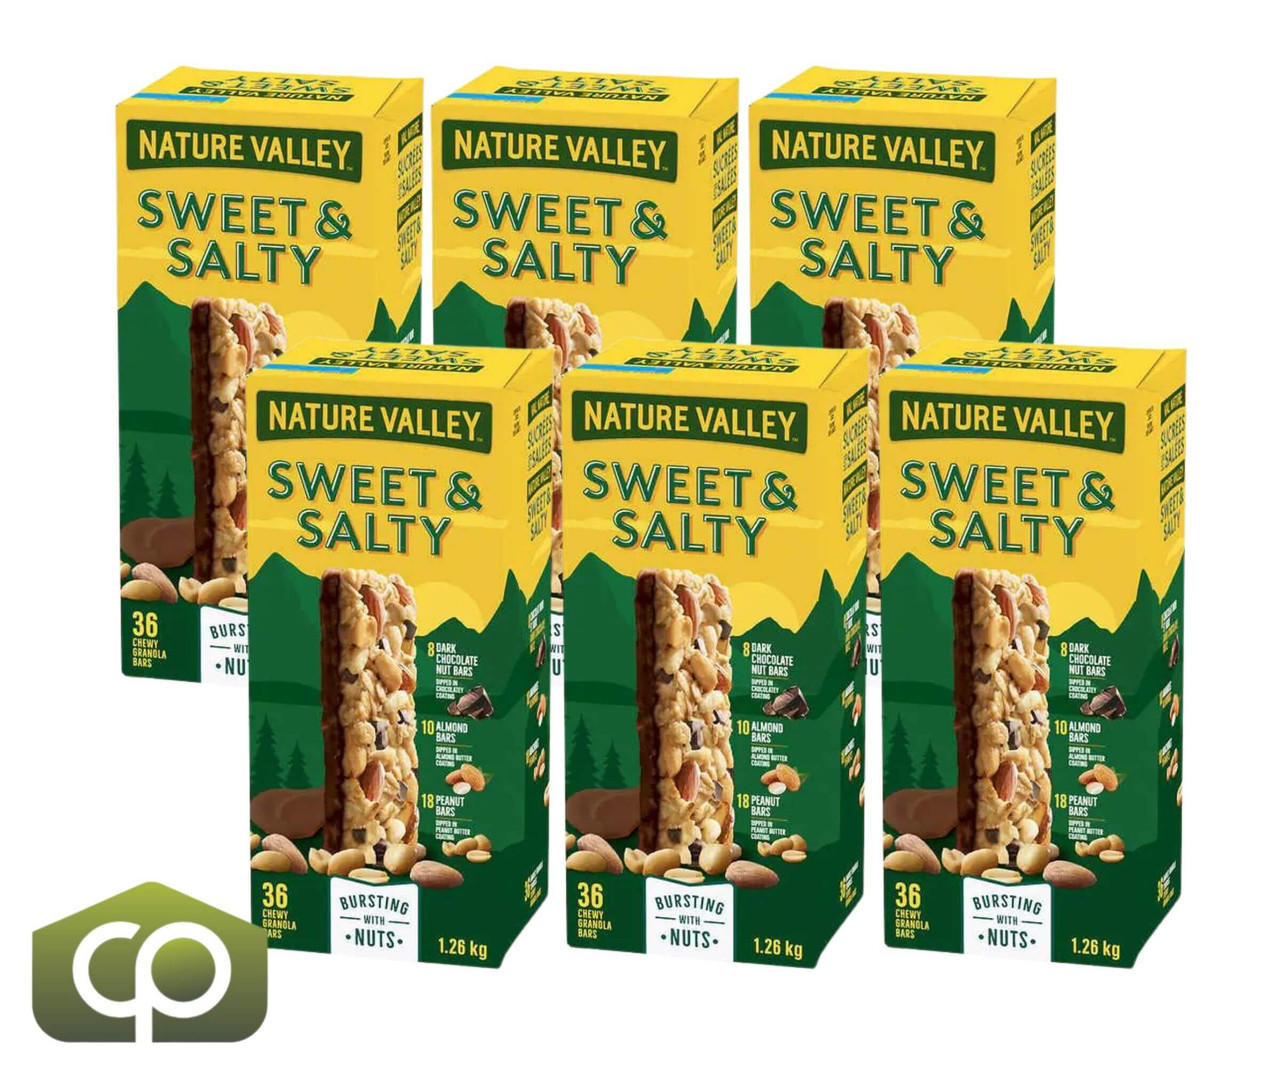 NATURE VALLEY Nature Valley Sweet & Salty Granola Bars - 36 Bars x 35g (6/Case) 